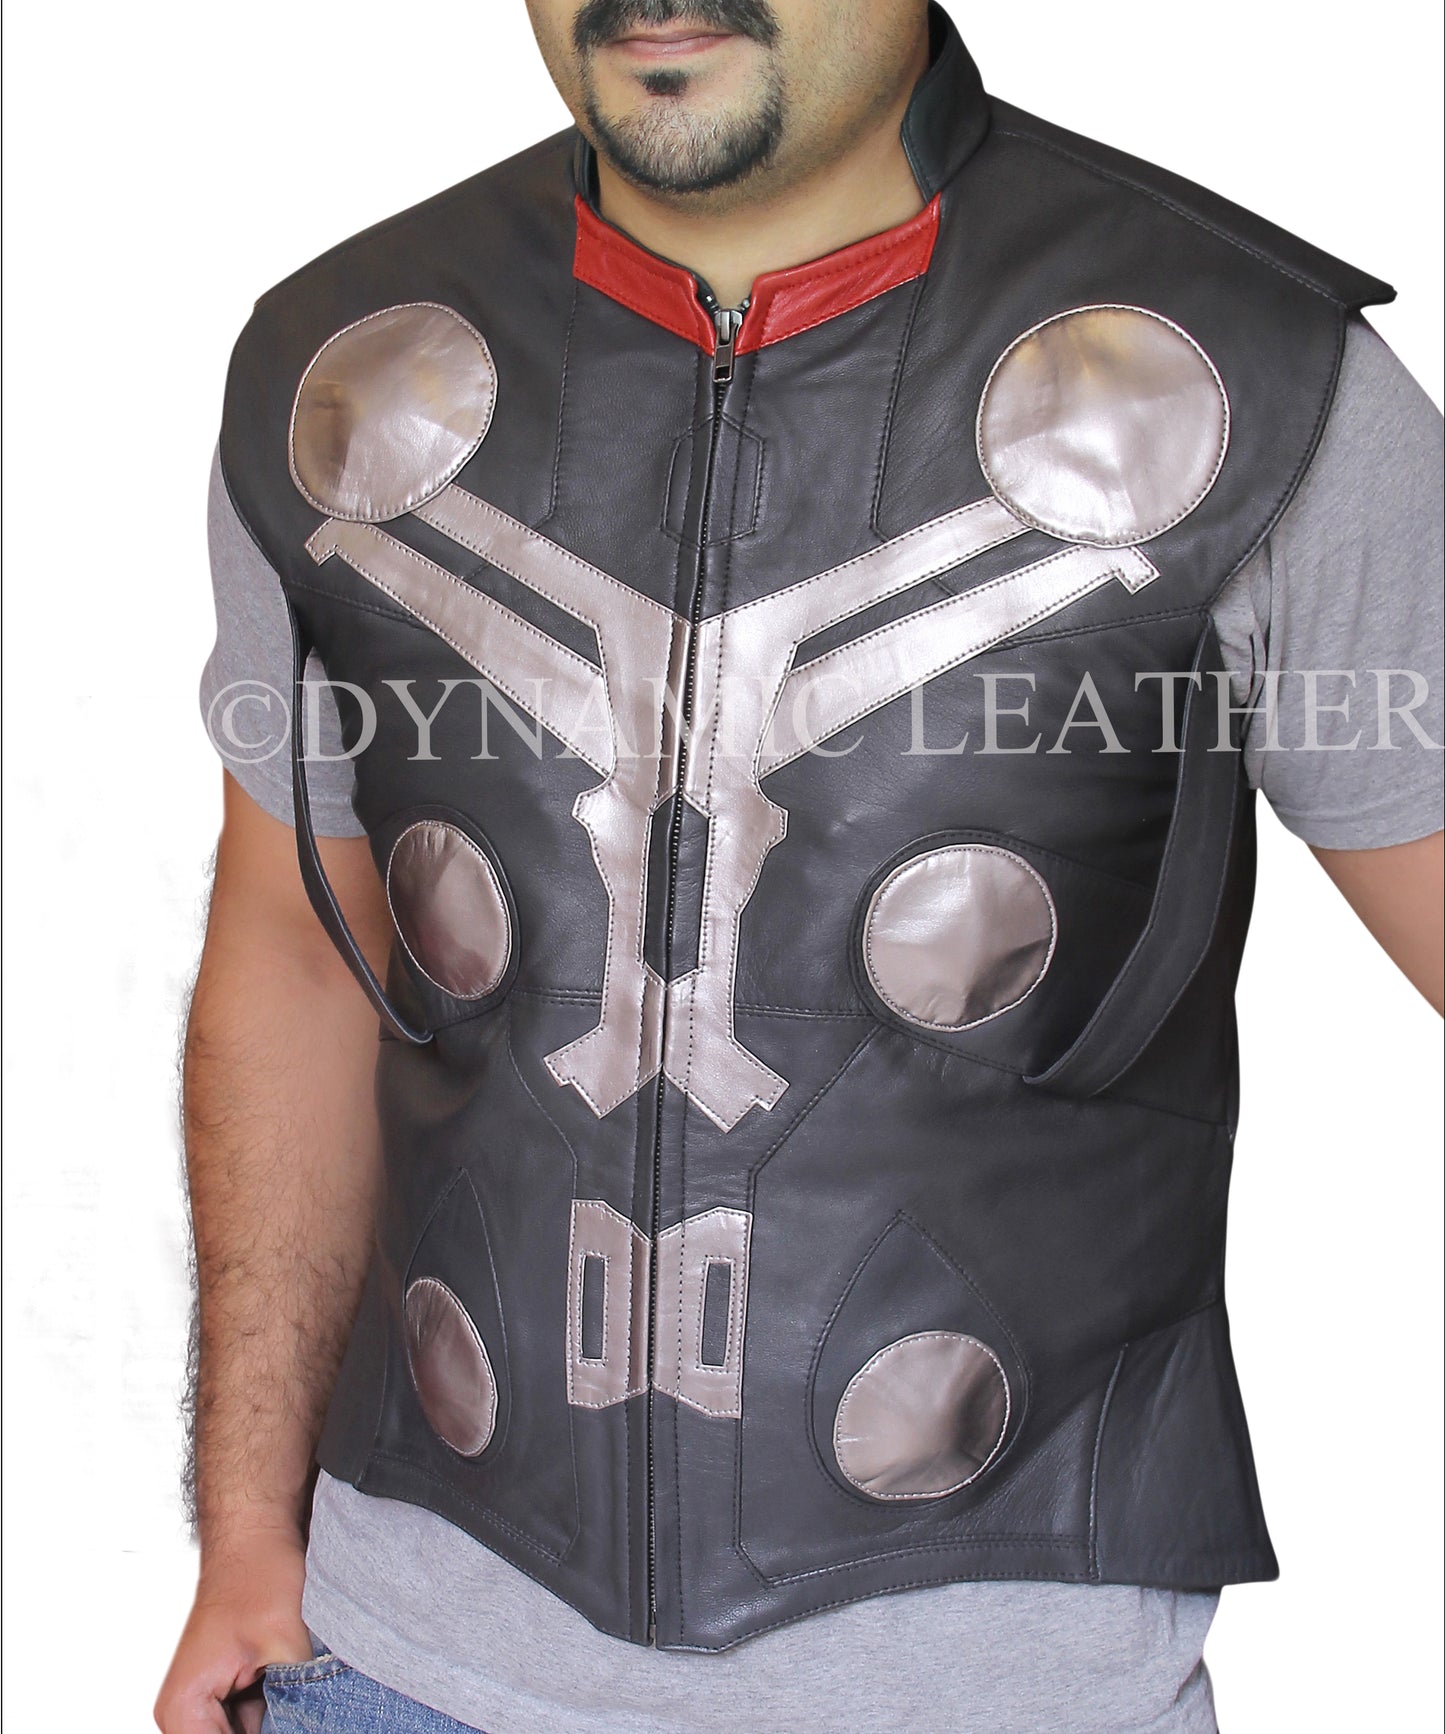 Thor, The Lord of Thunder Real Leather Costume Vest